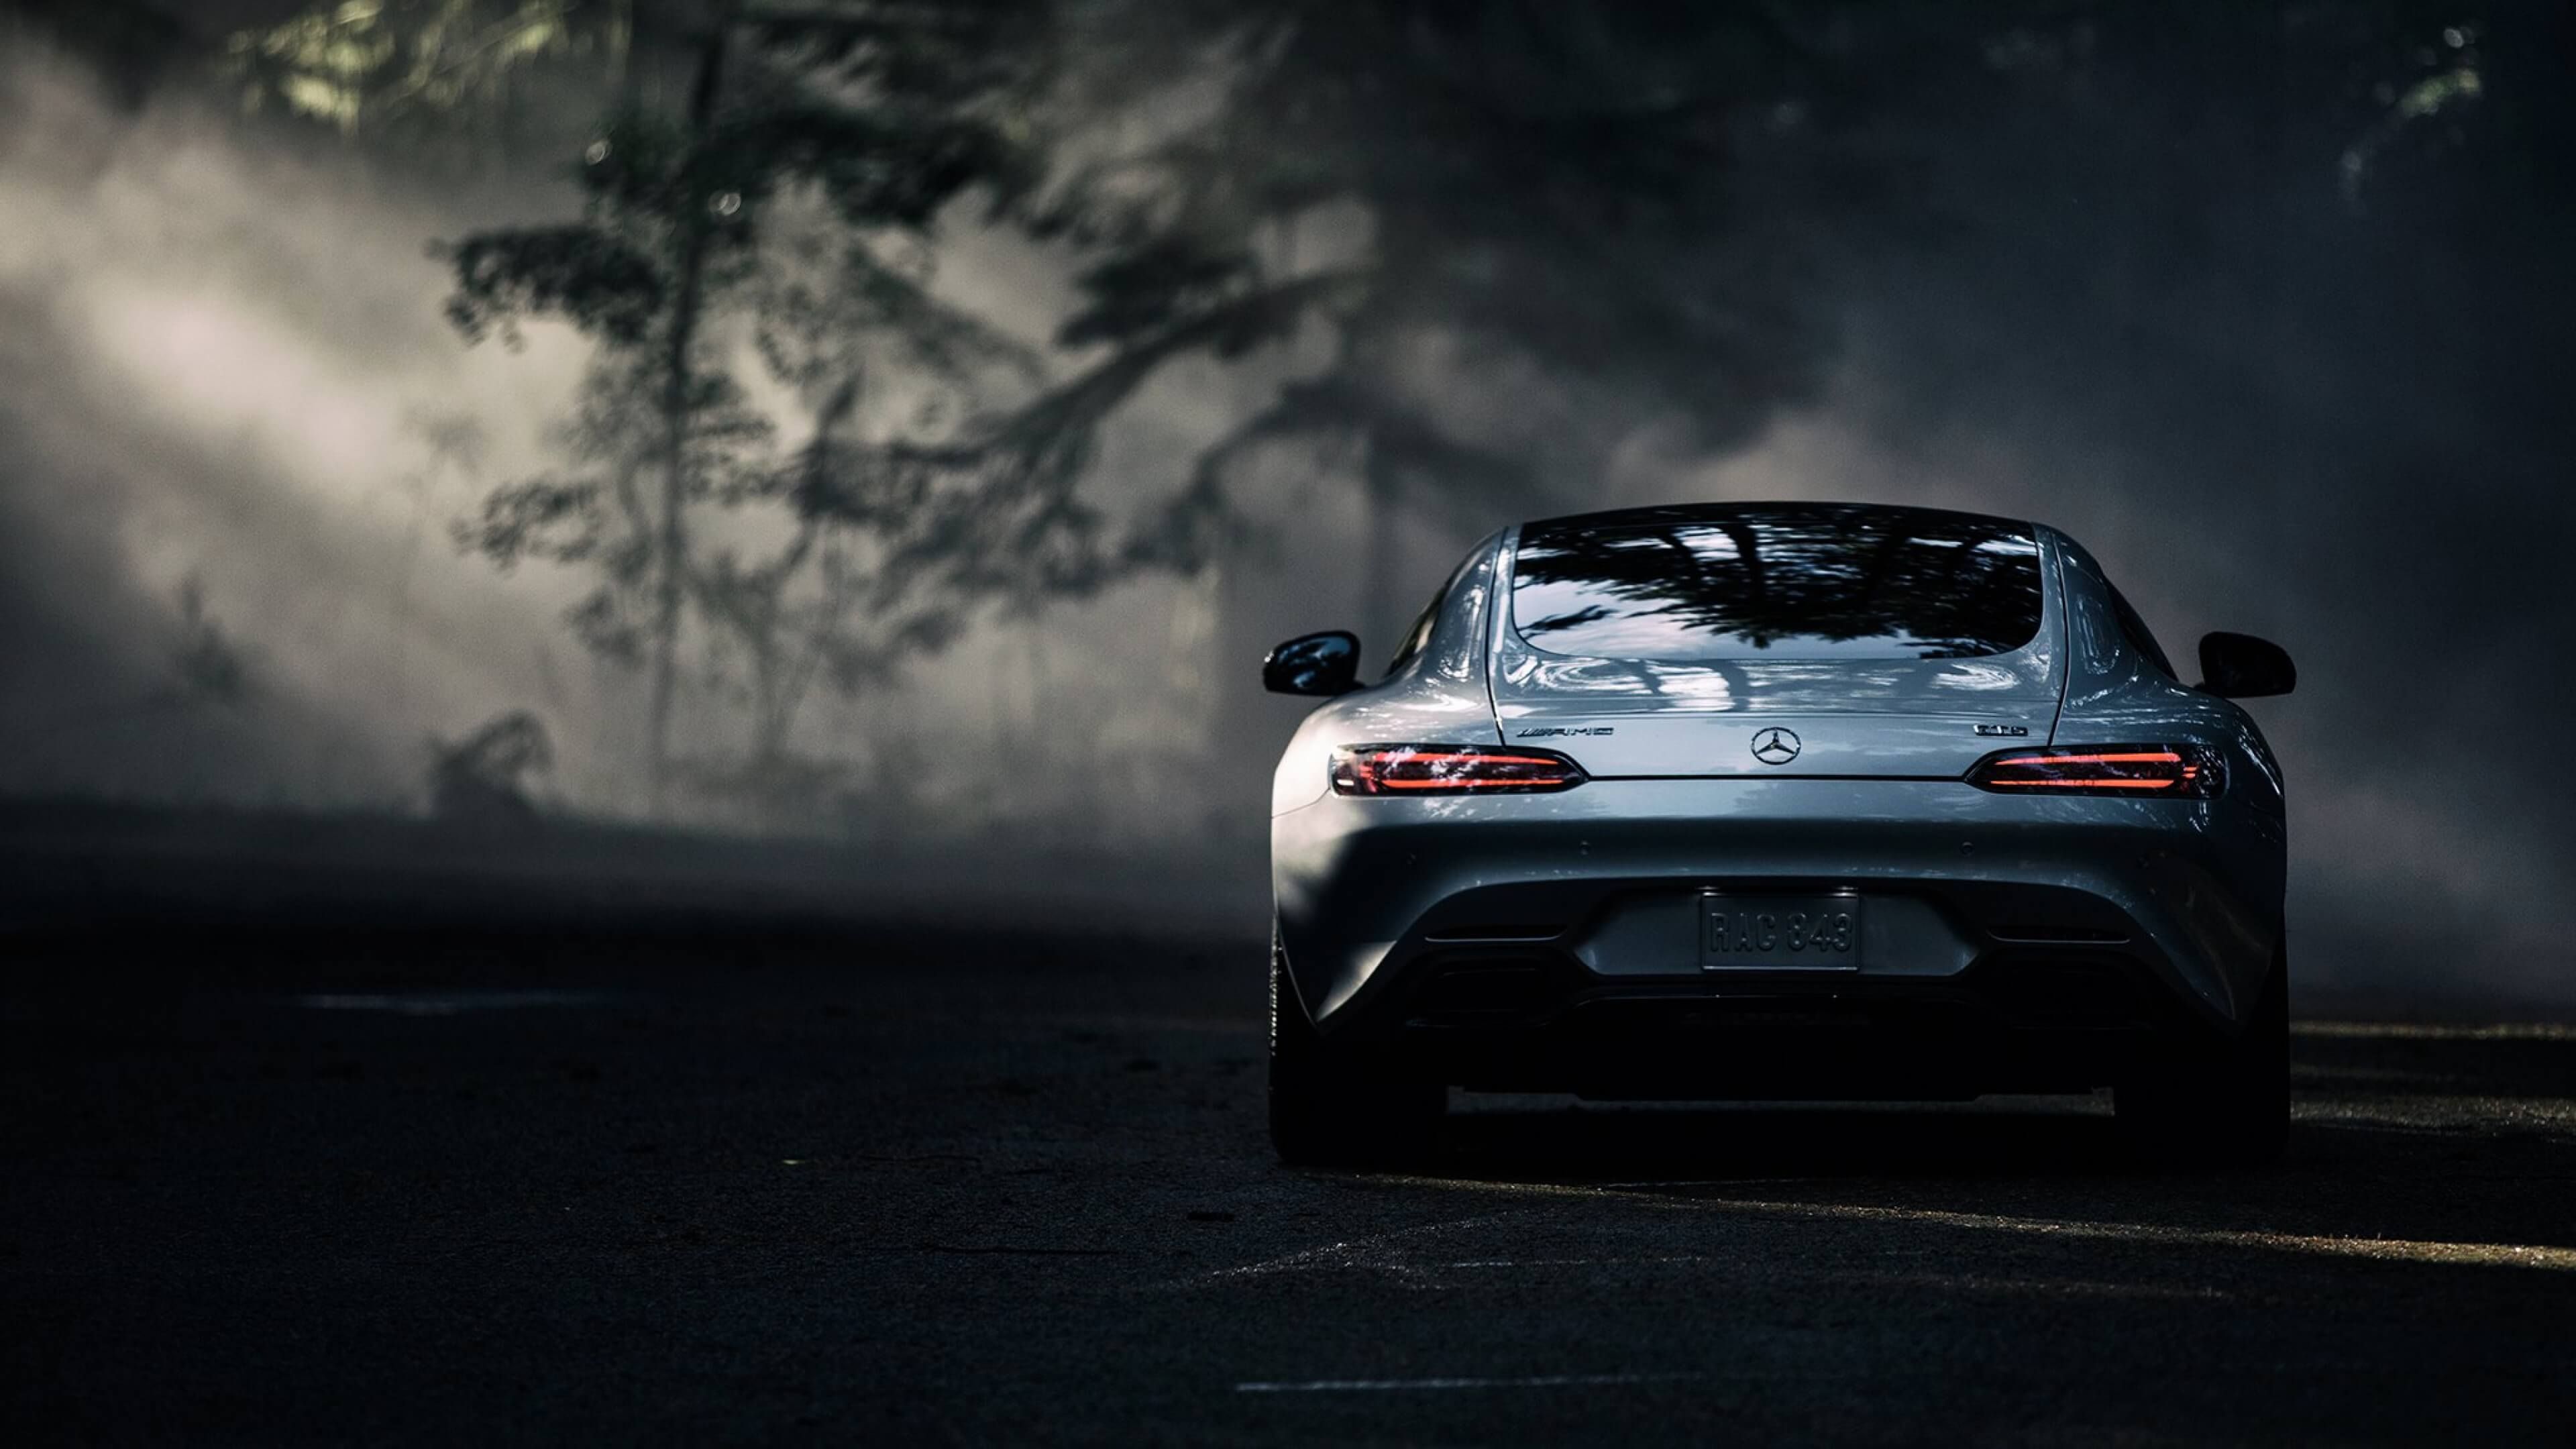 Mercedes Benz AMG GT Wallpapers and Background Images stmednet